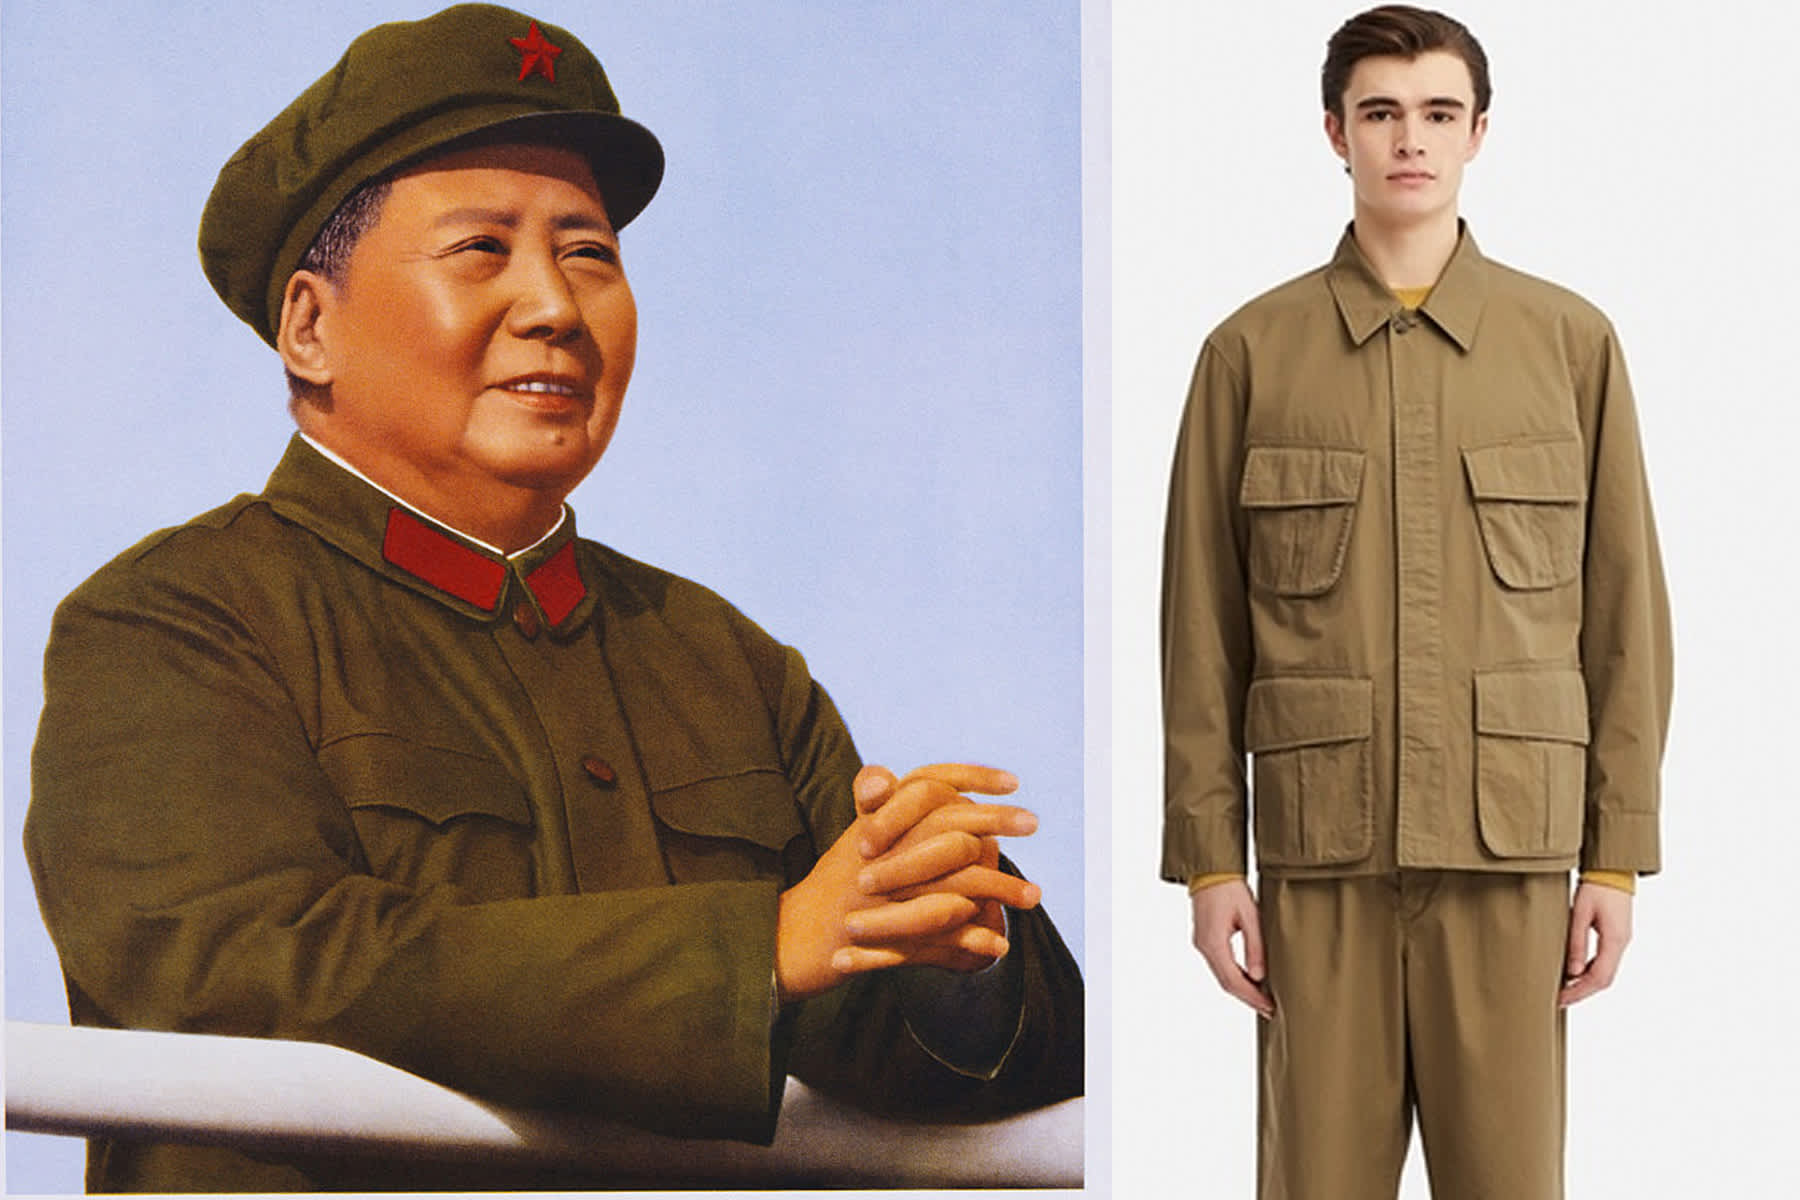 Uniqlo jacket's resemblance to Chairman Mao Zedong is 'coincidental'